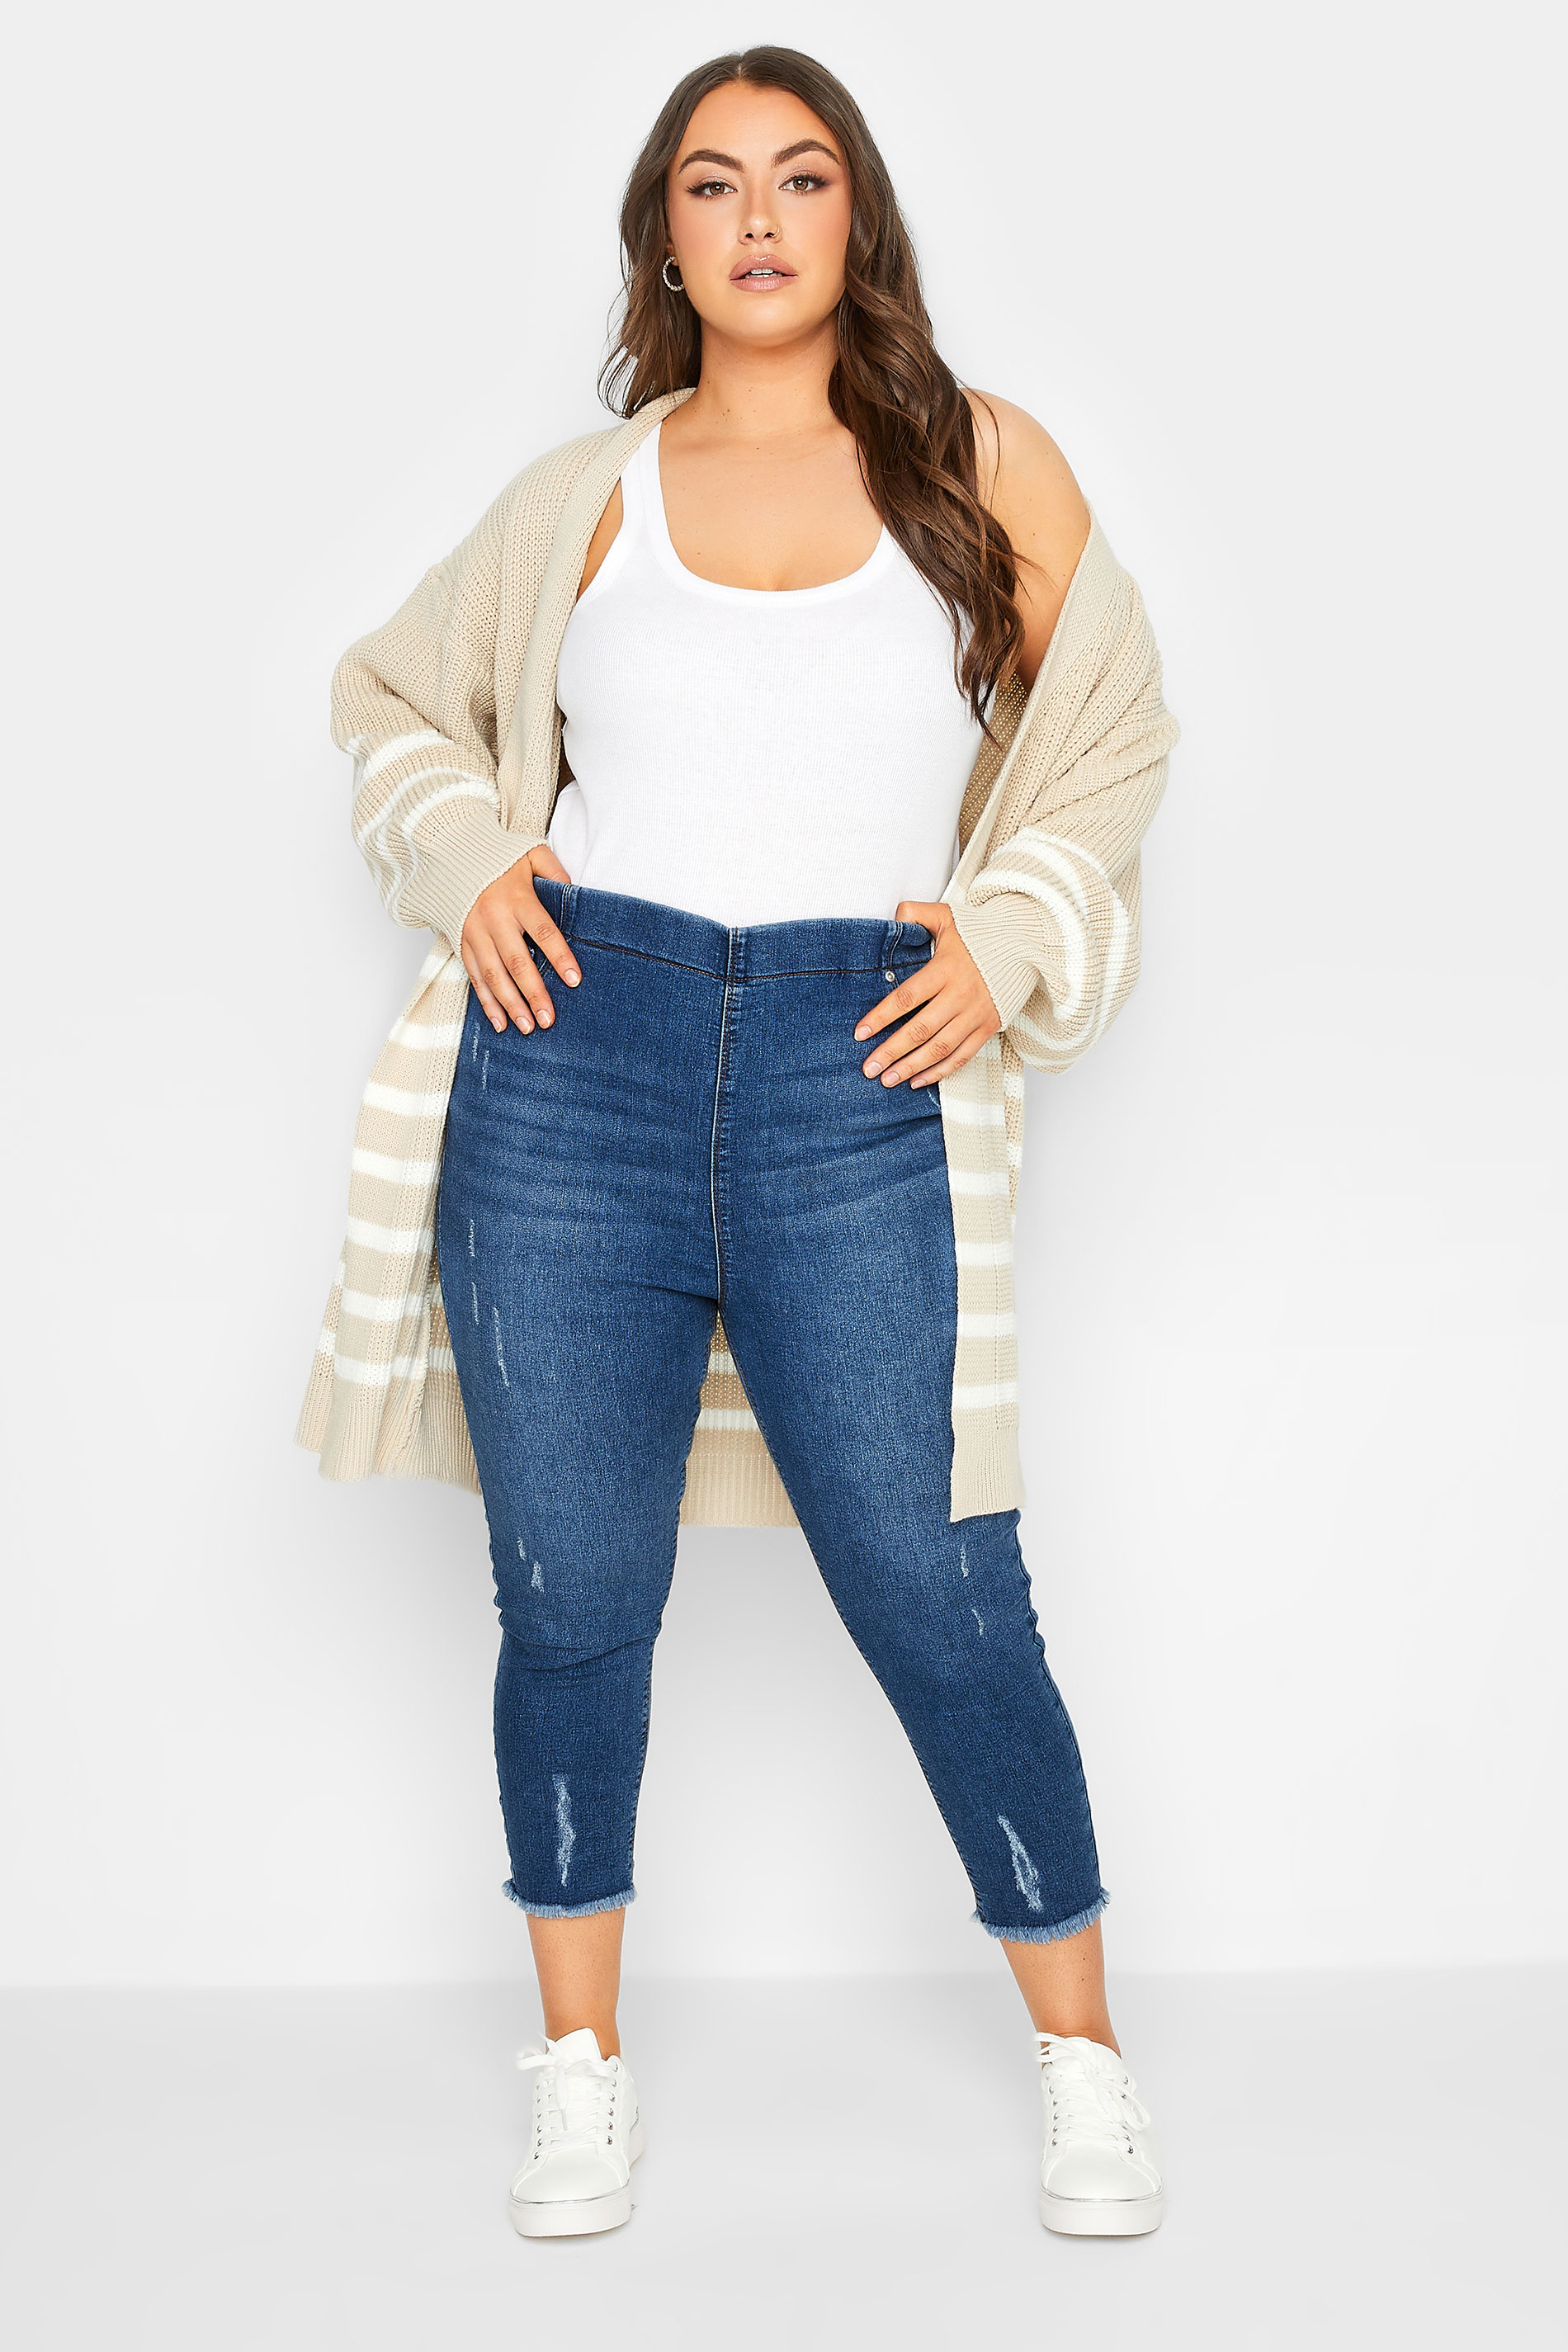 https://cdn.yoursclothing.com/Images/ProductImages/4ffb0f95-4cdd-49_144747_B.jpg